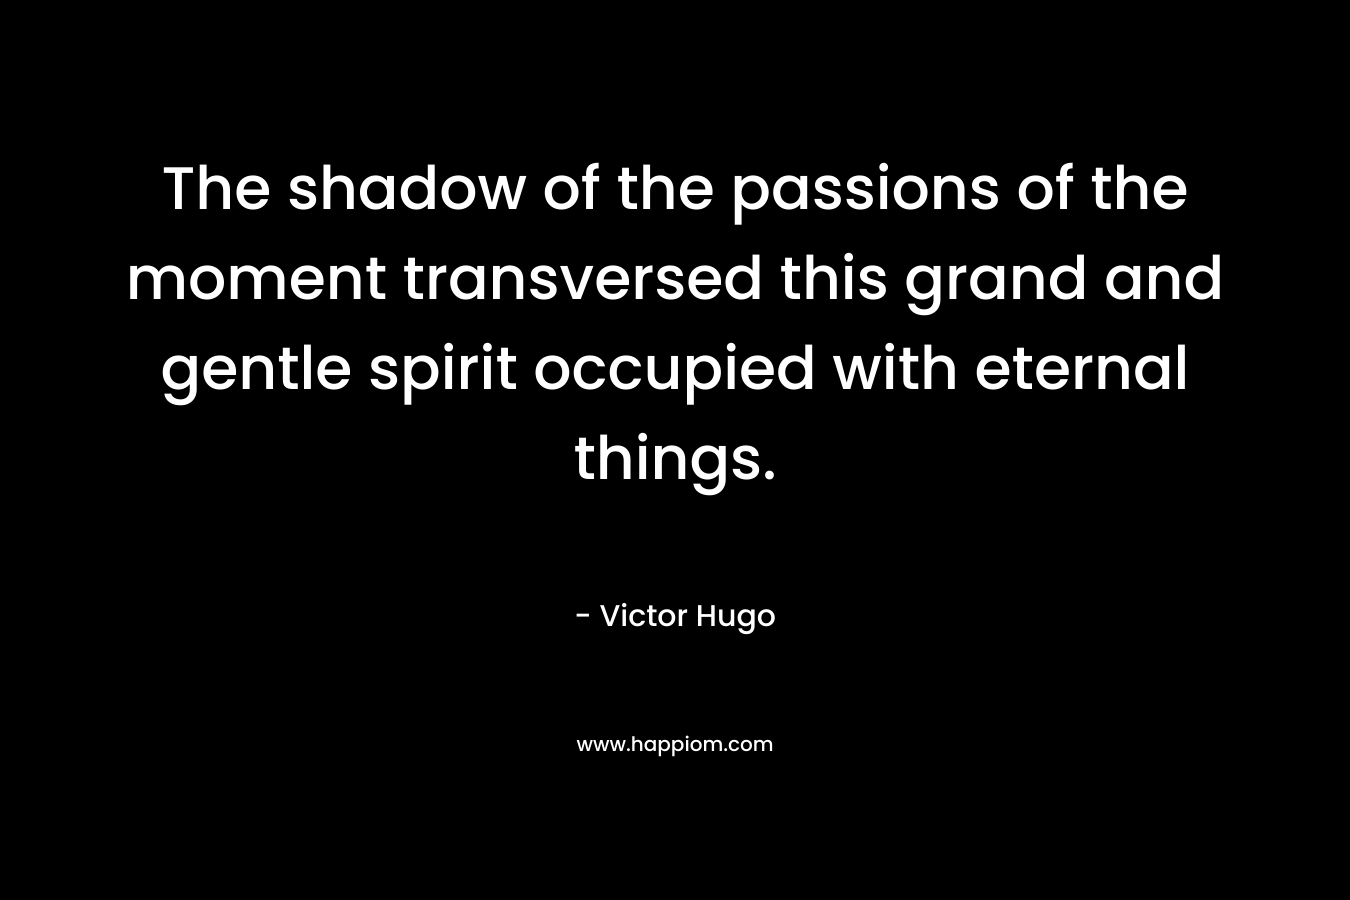 The shadow of the passions of the moment transversed this grand and gentle spirit occupied with eternal things. – Victor Hugo